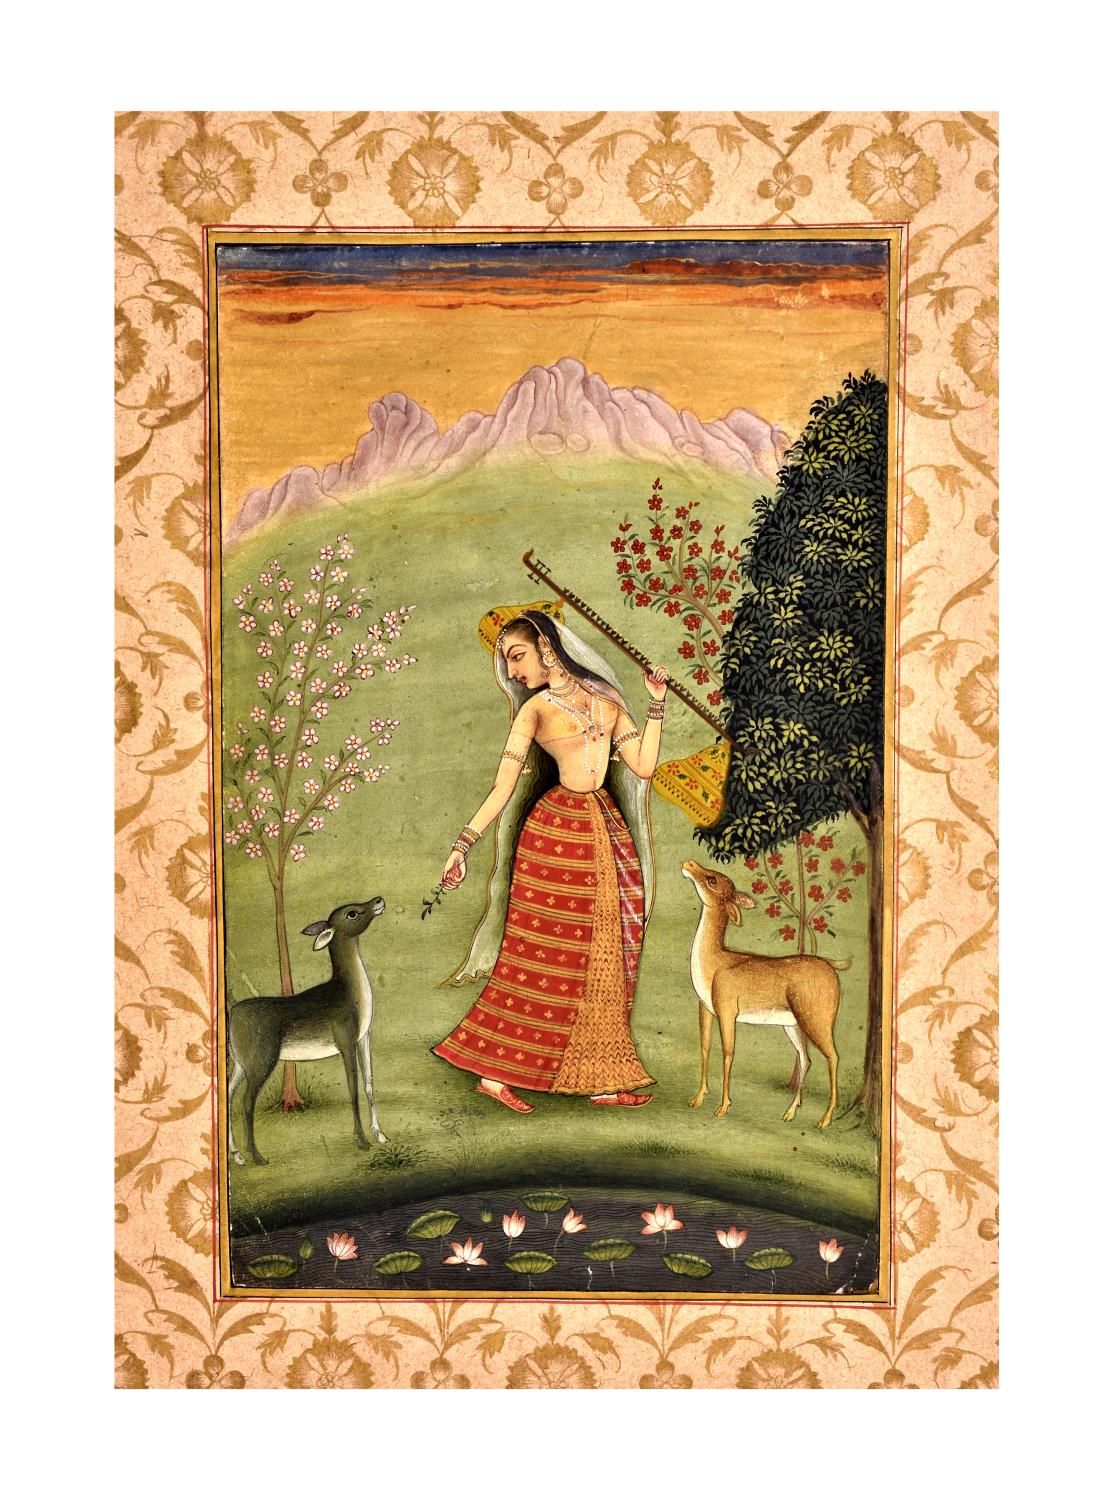 A PROVINCIAL MUGHAL TODI RAGANI, A PRINCESS PLAYING MUSIC DEPICTED IN A FOREST, &hellip;